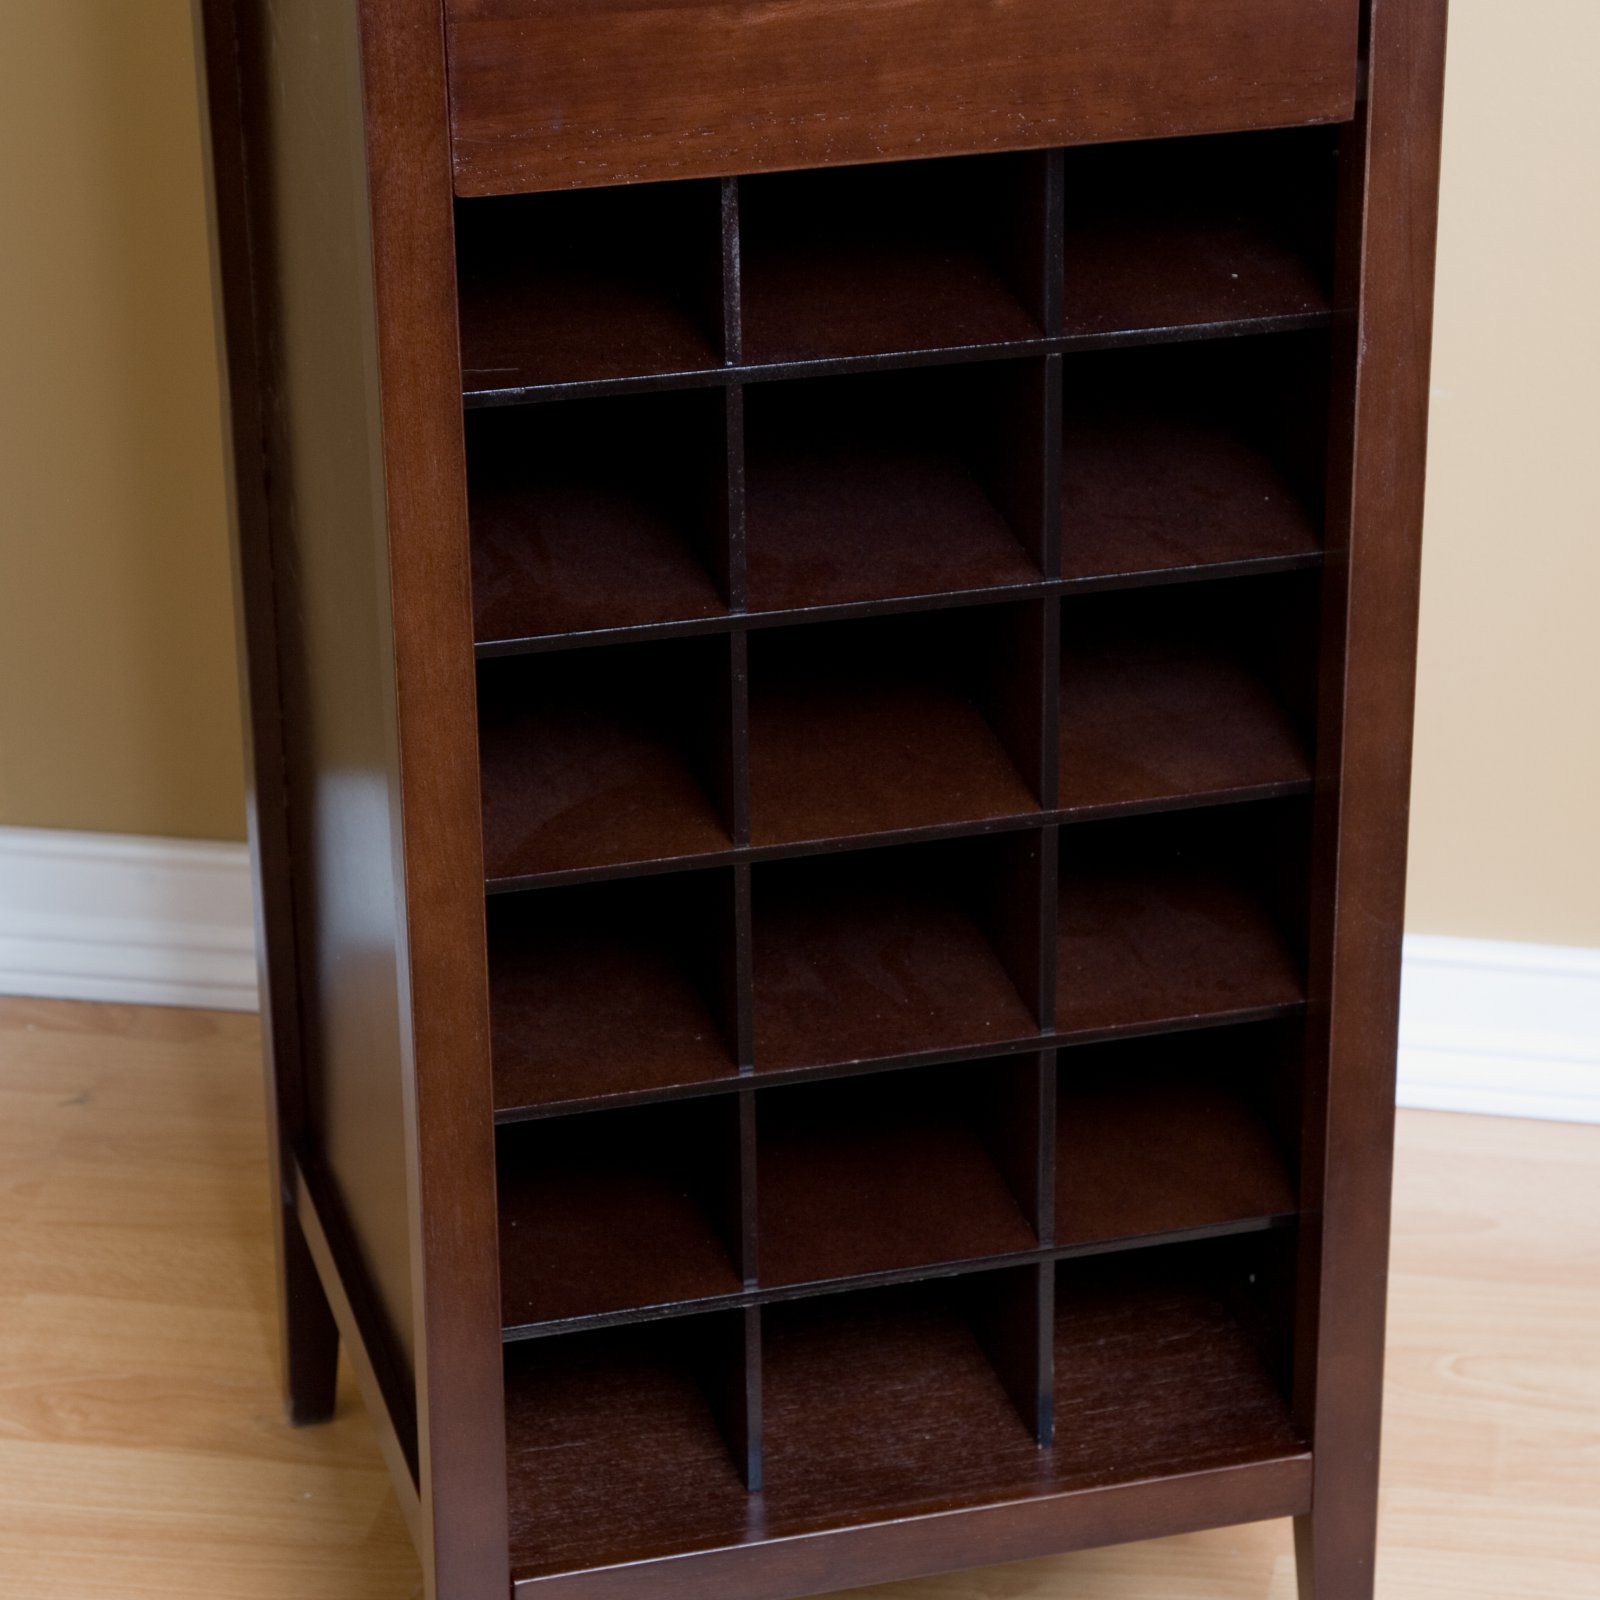 Winsome Wood Willis 18-Bottle Wine Tower With Rack and Shelves, Espresso Finish - image 3 of 4